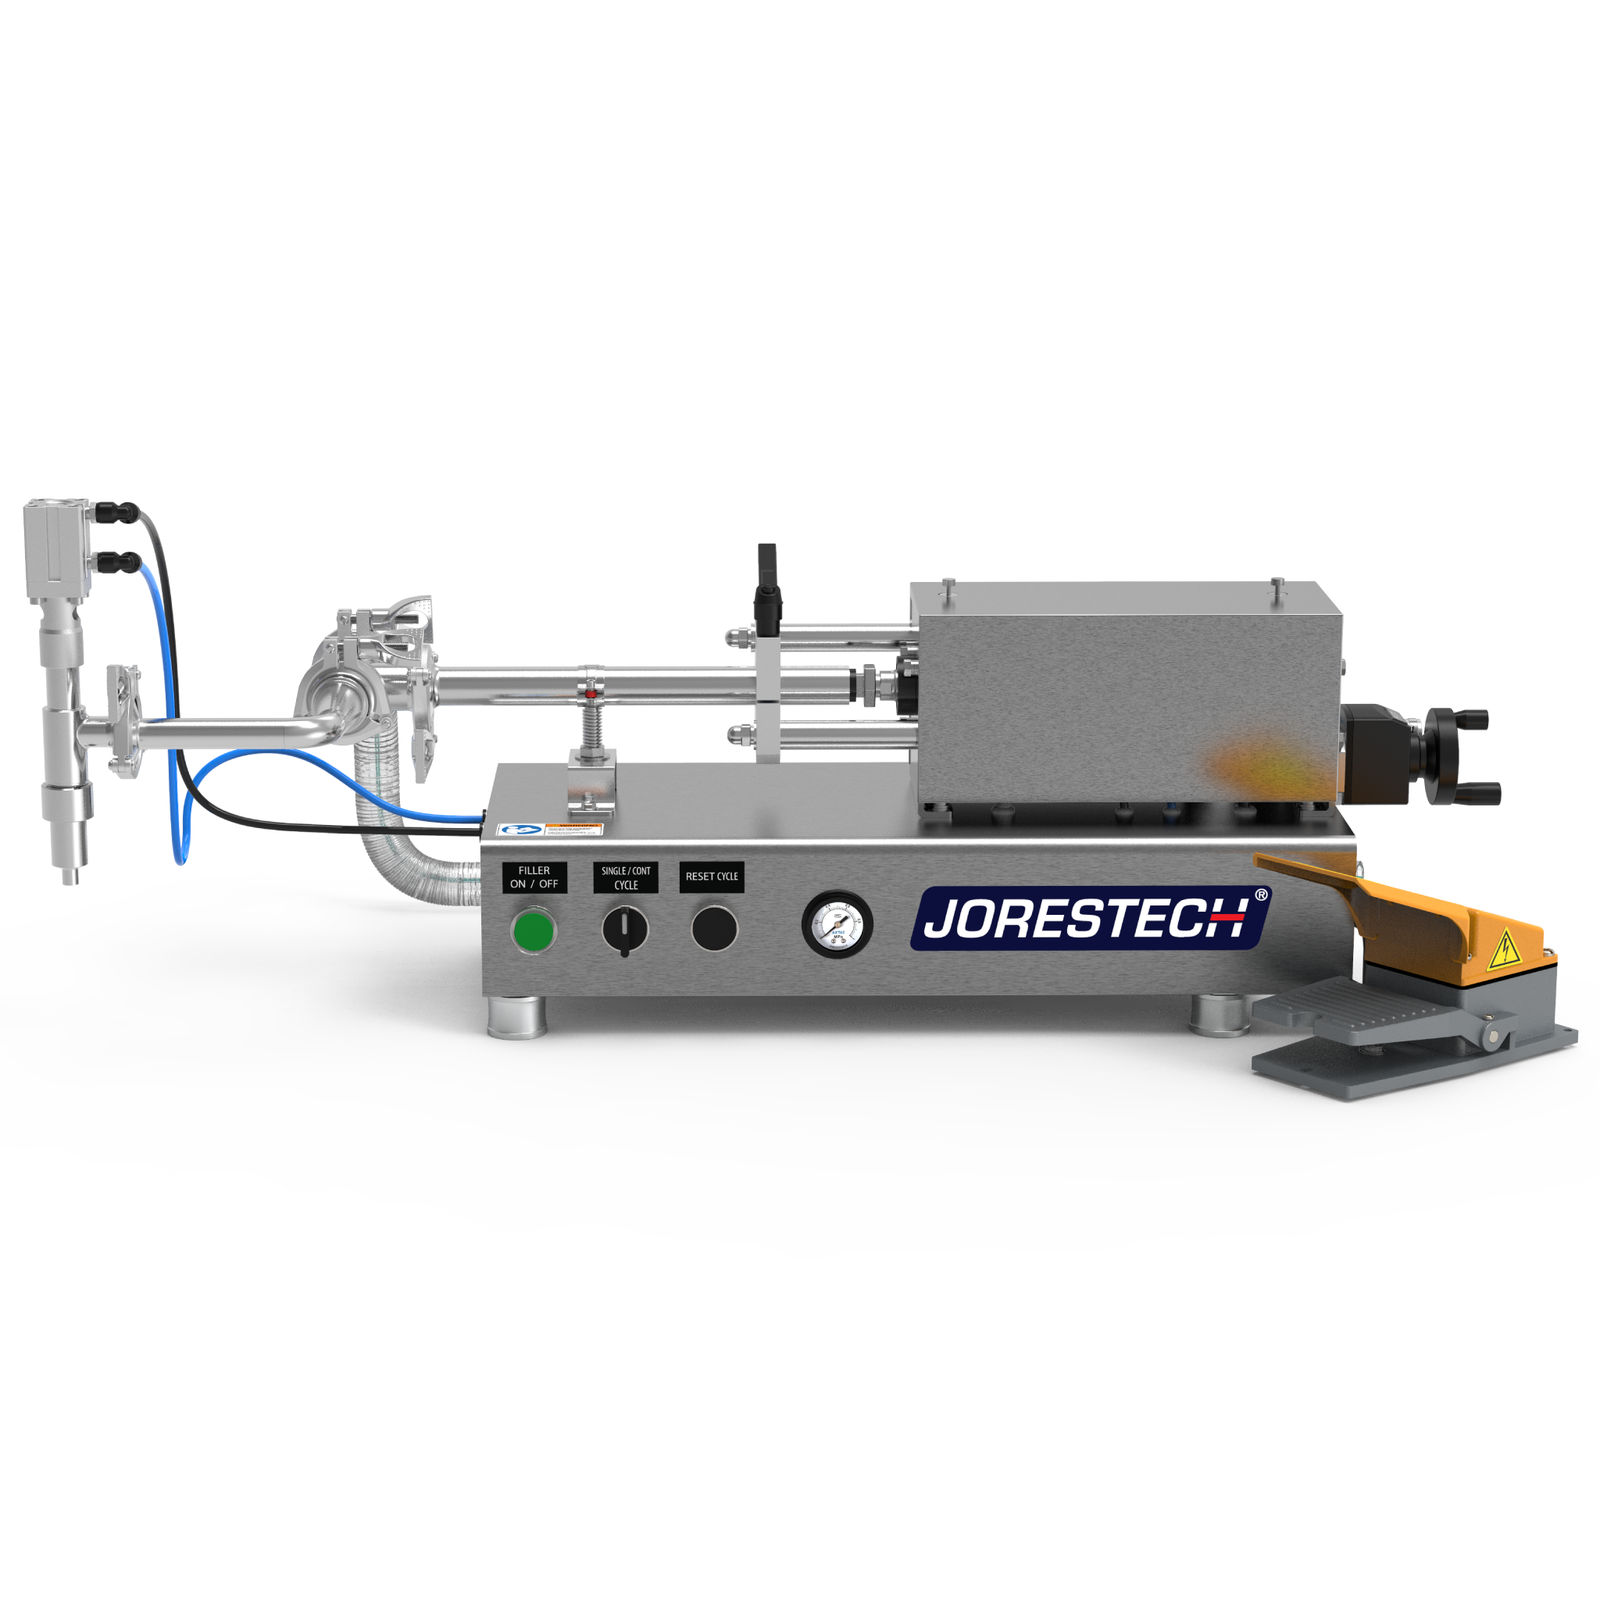 Low viscosity JORES TECHNOLOGIES® piston filling machine. The piston filler is made out of stainless steel and there's a yellow and grey foot pedal resting on the side.